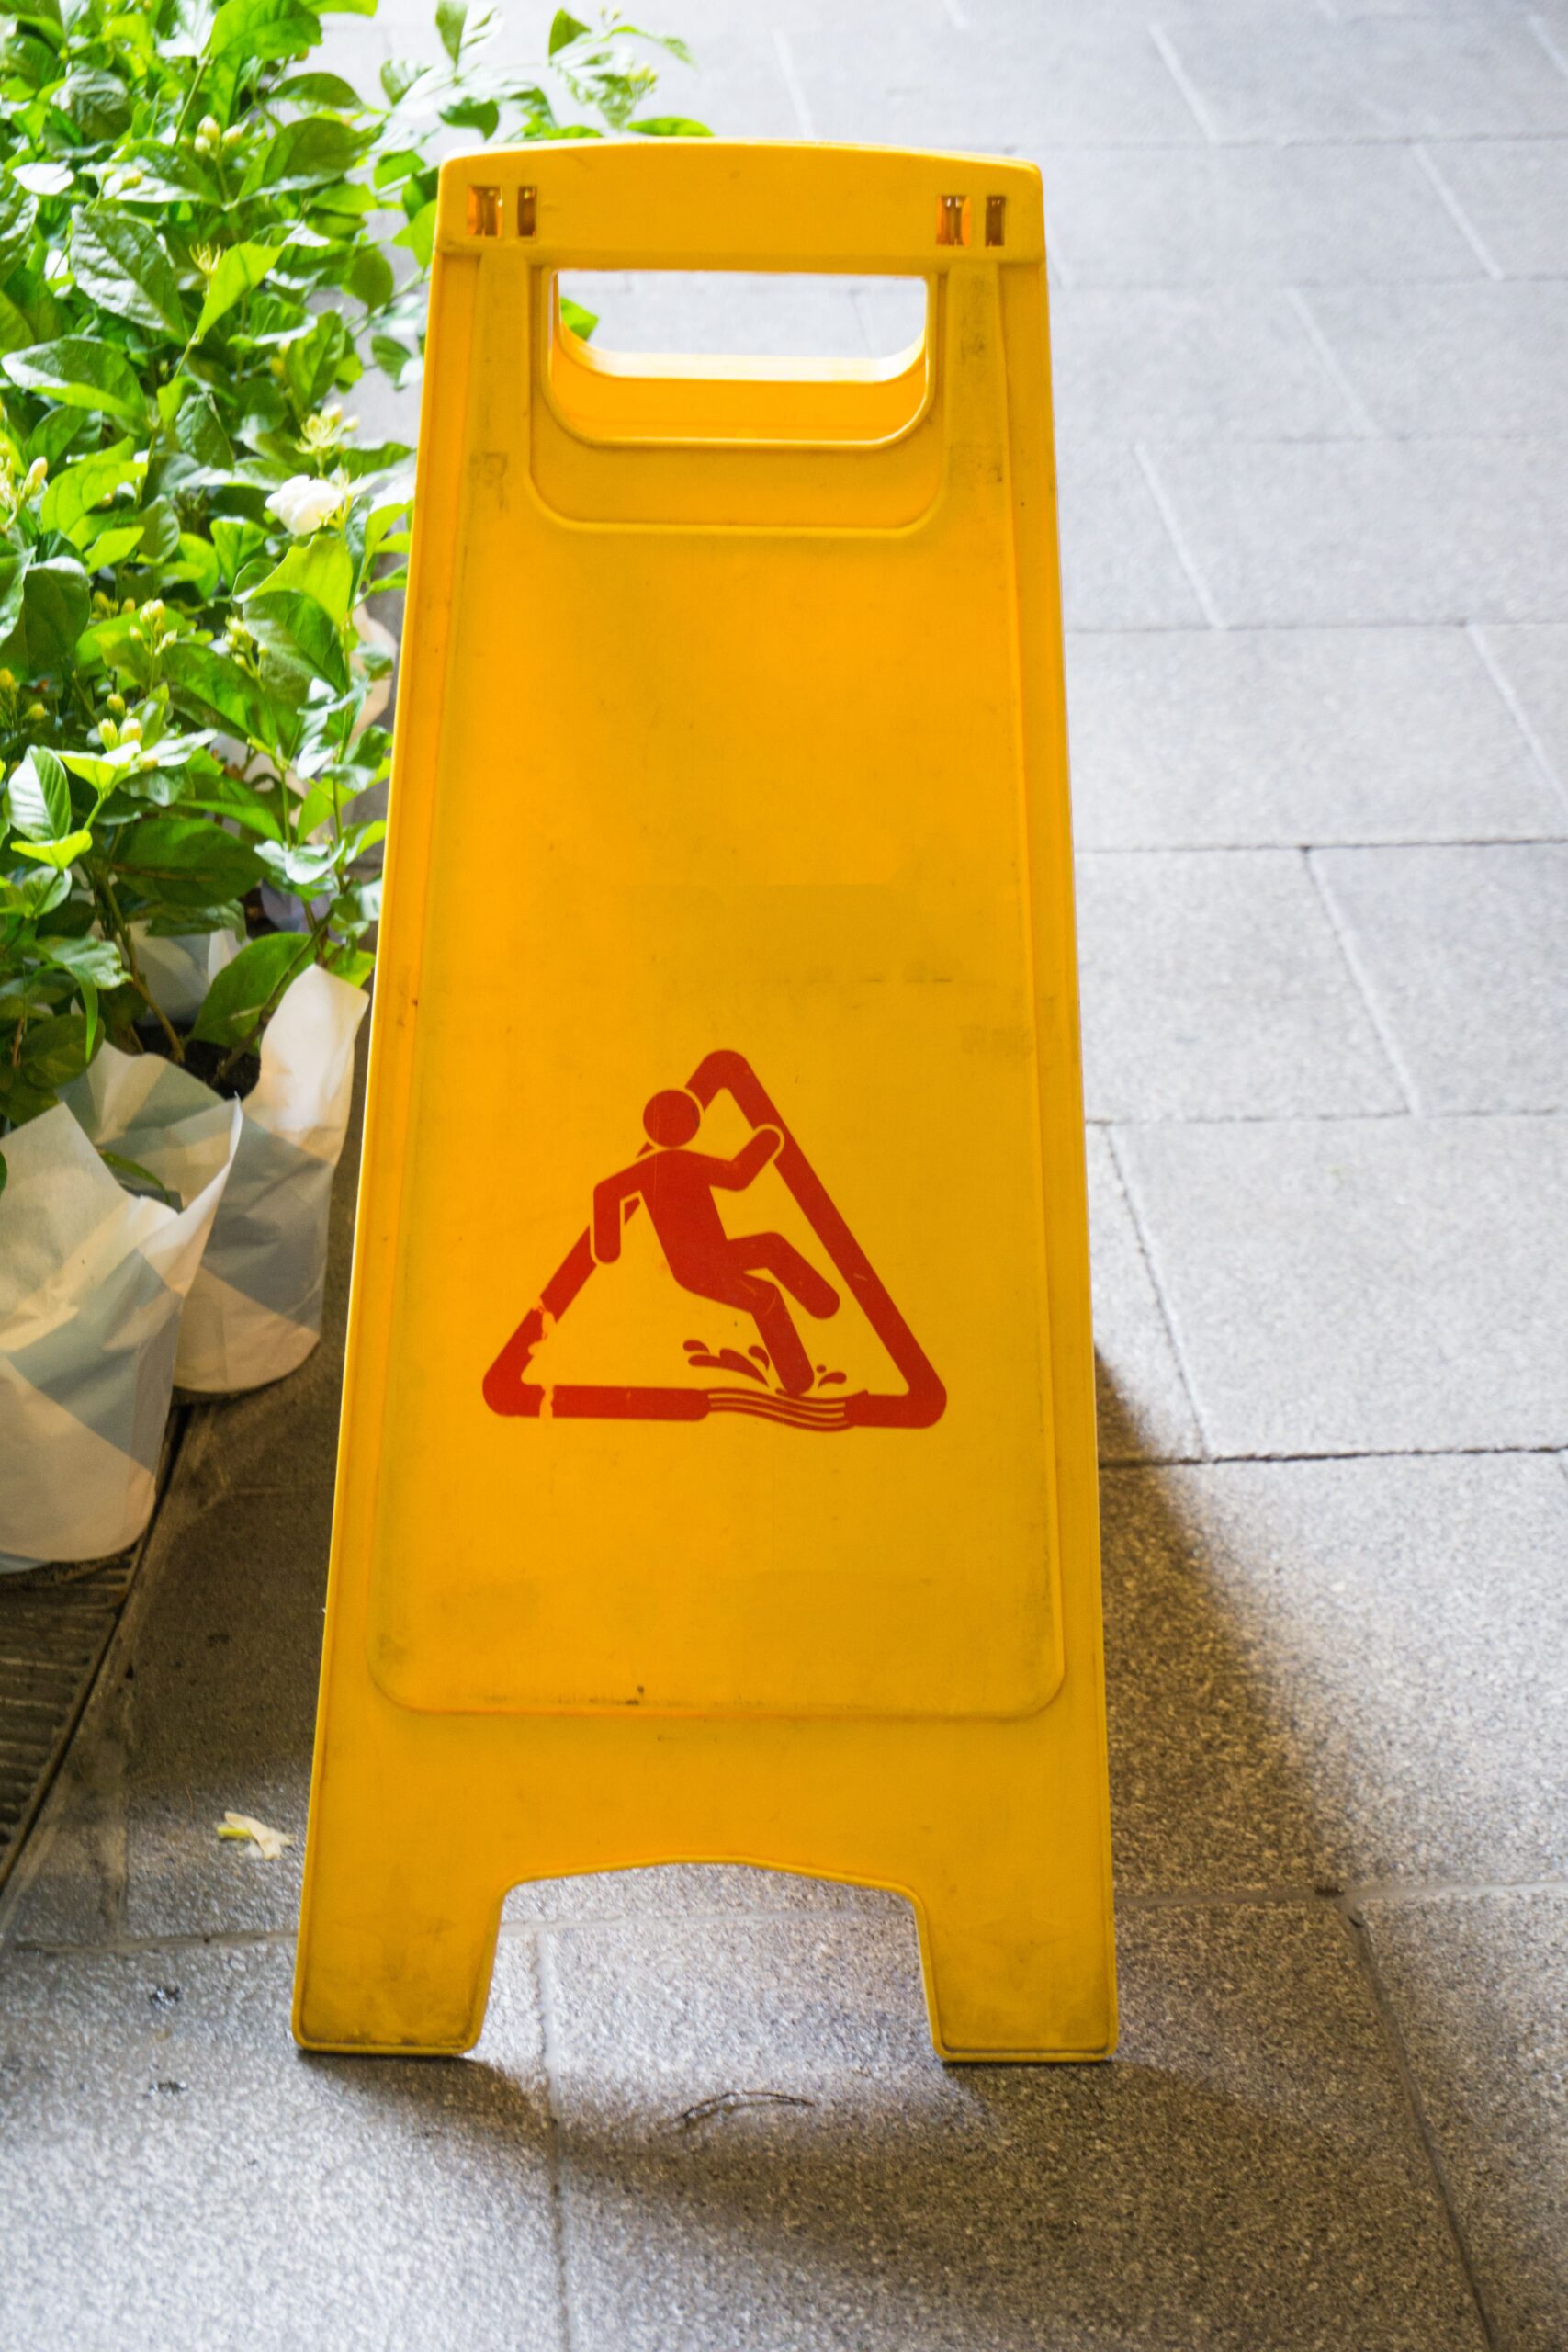 Tennessee Slip and Fall Lawyer